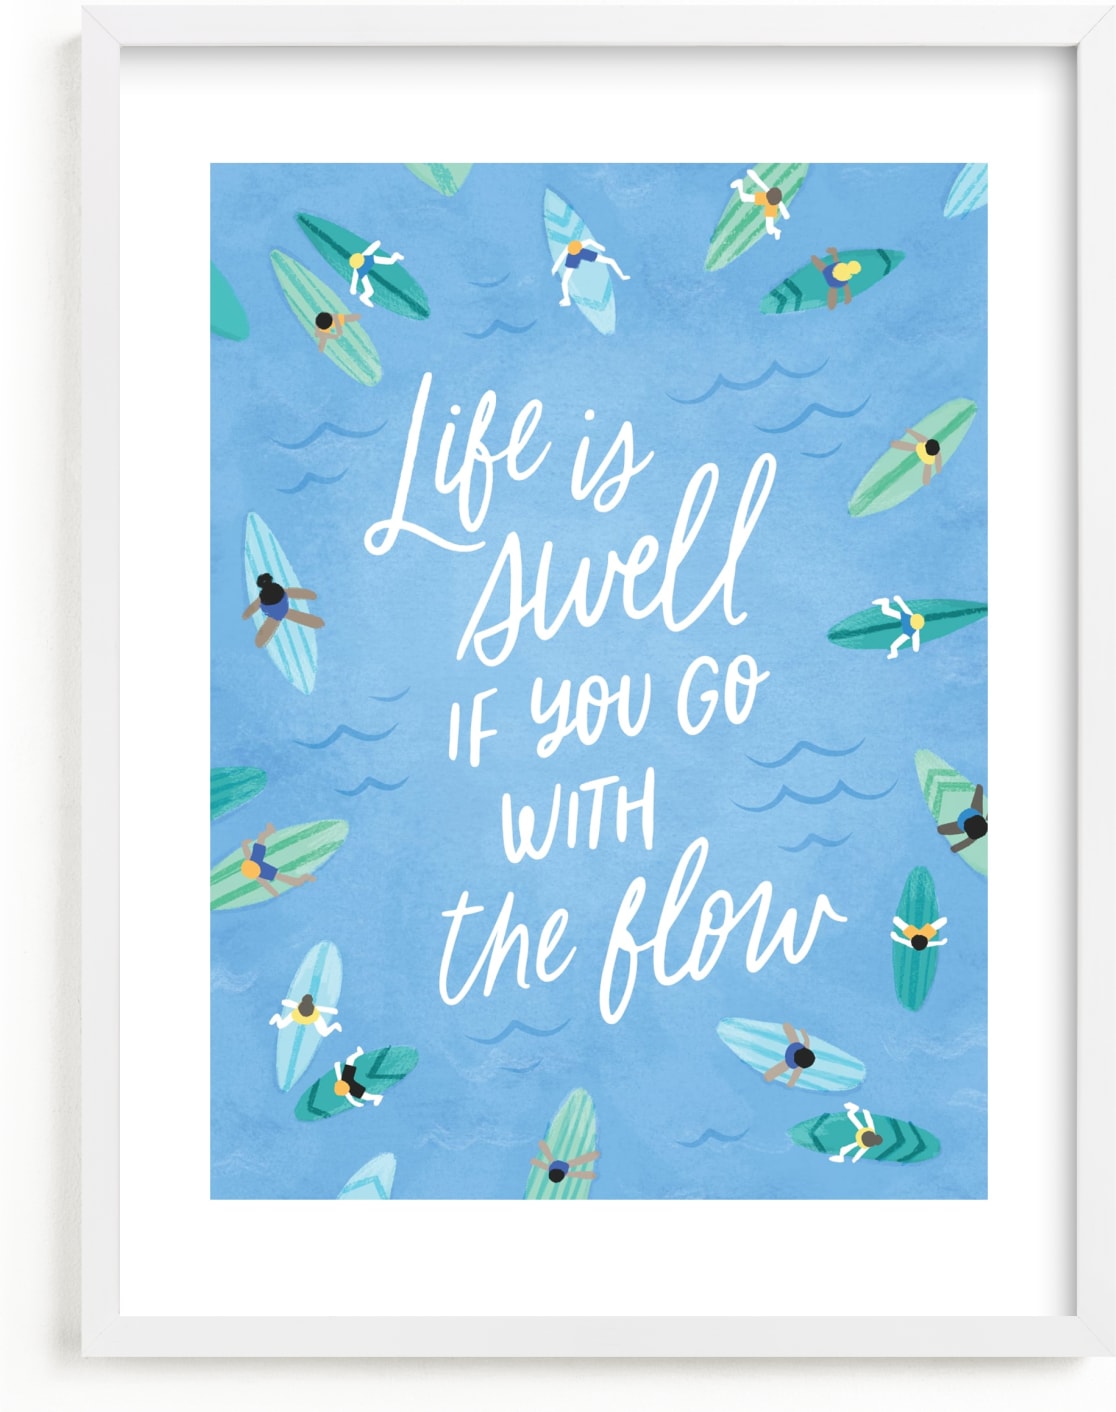 This is a blue kids wall art by Jessie Steury called Life is Swell.